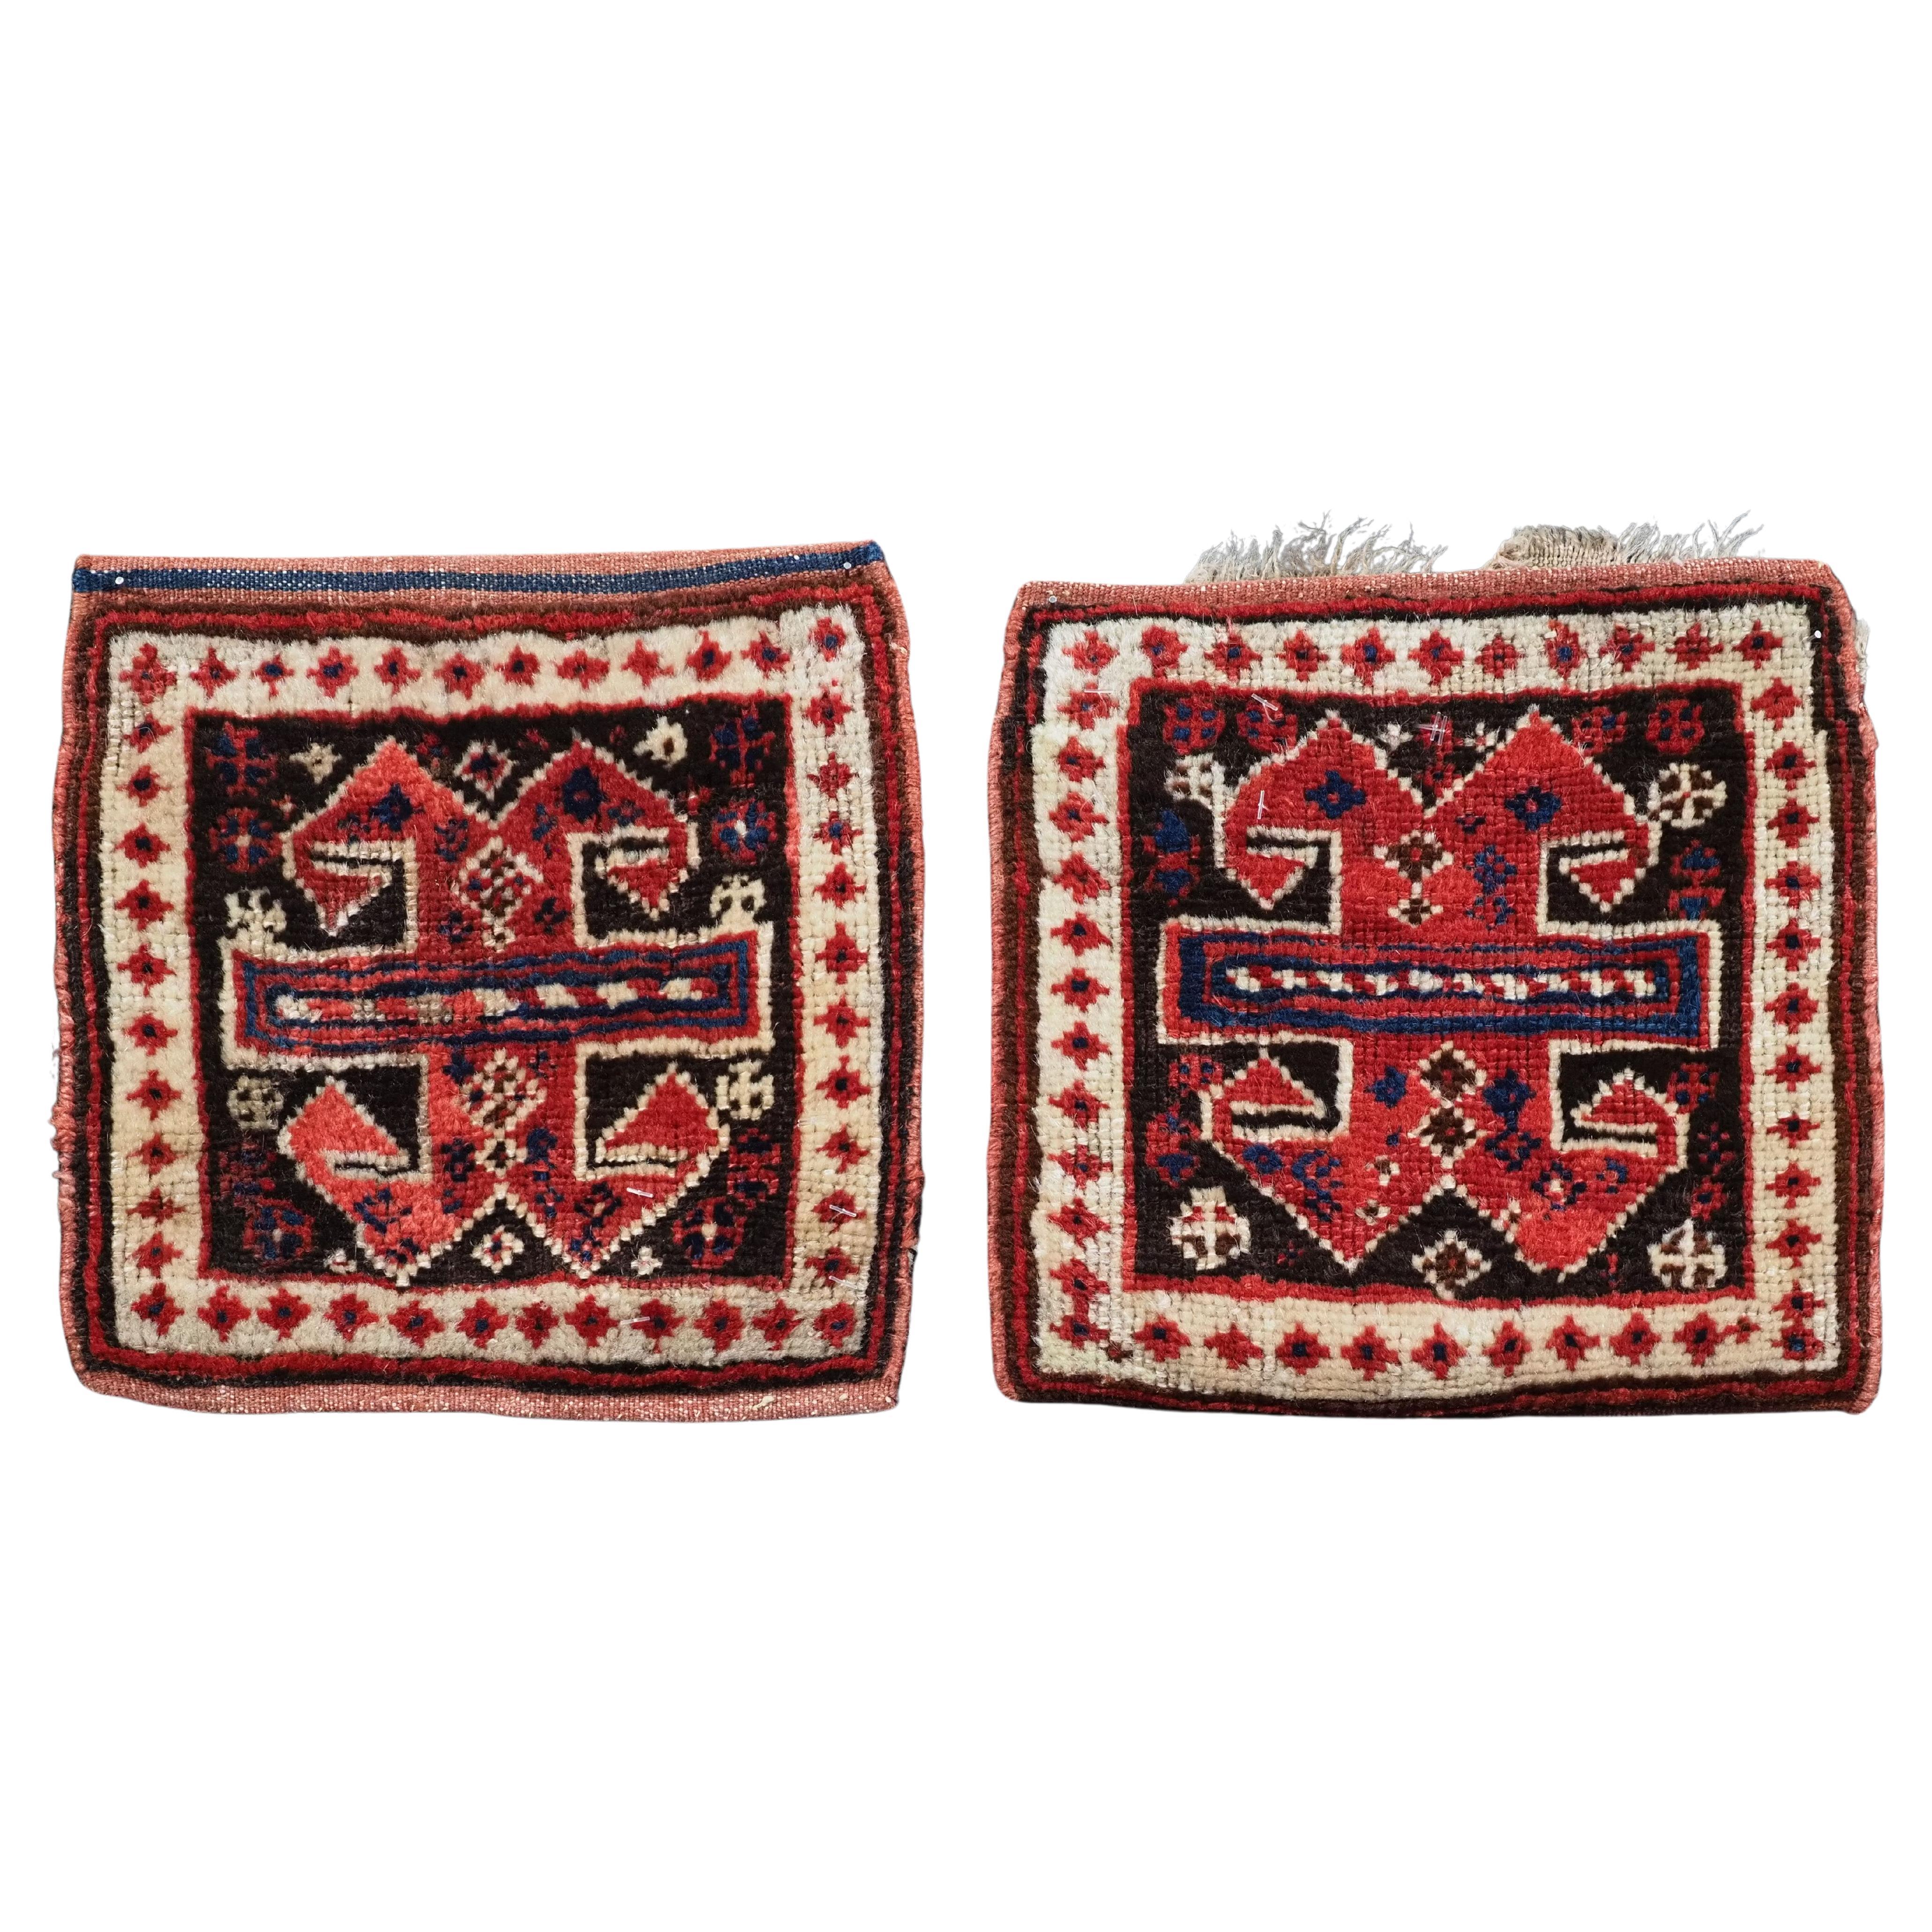 Antique tribal bags with plain weave backs, by the Shahsavan Tribe.  Circa 1880.